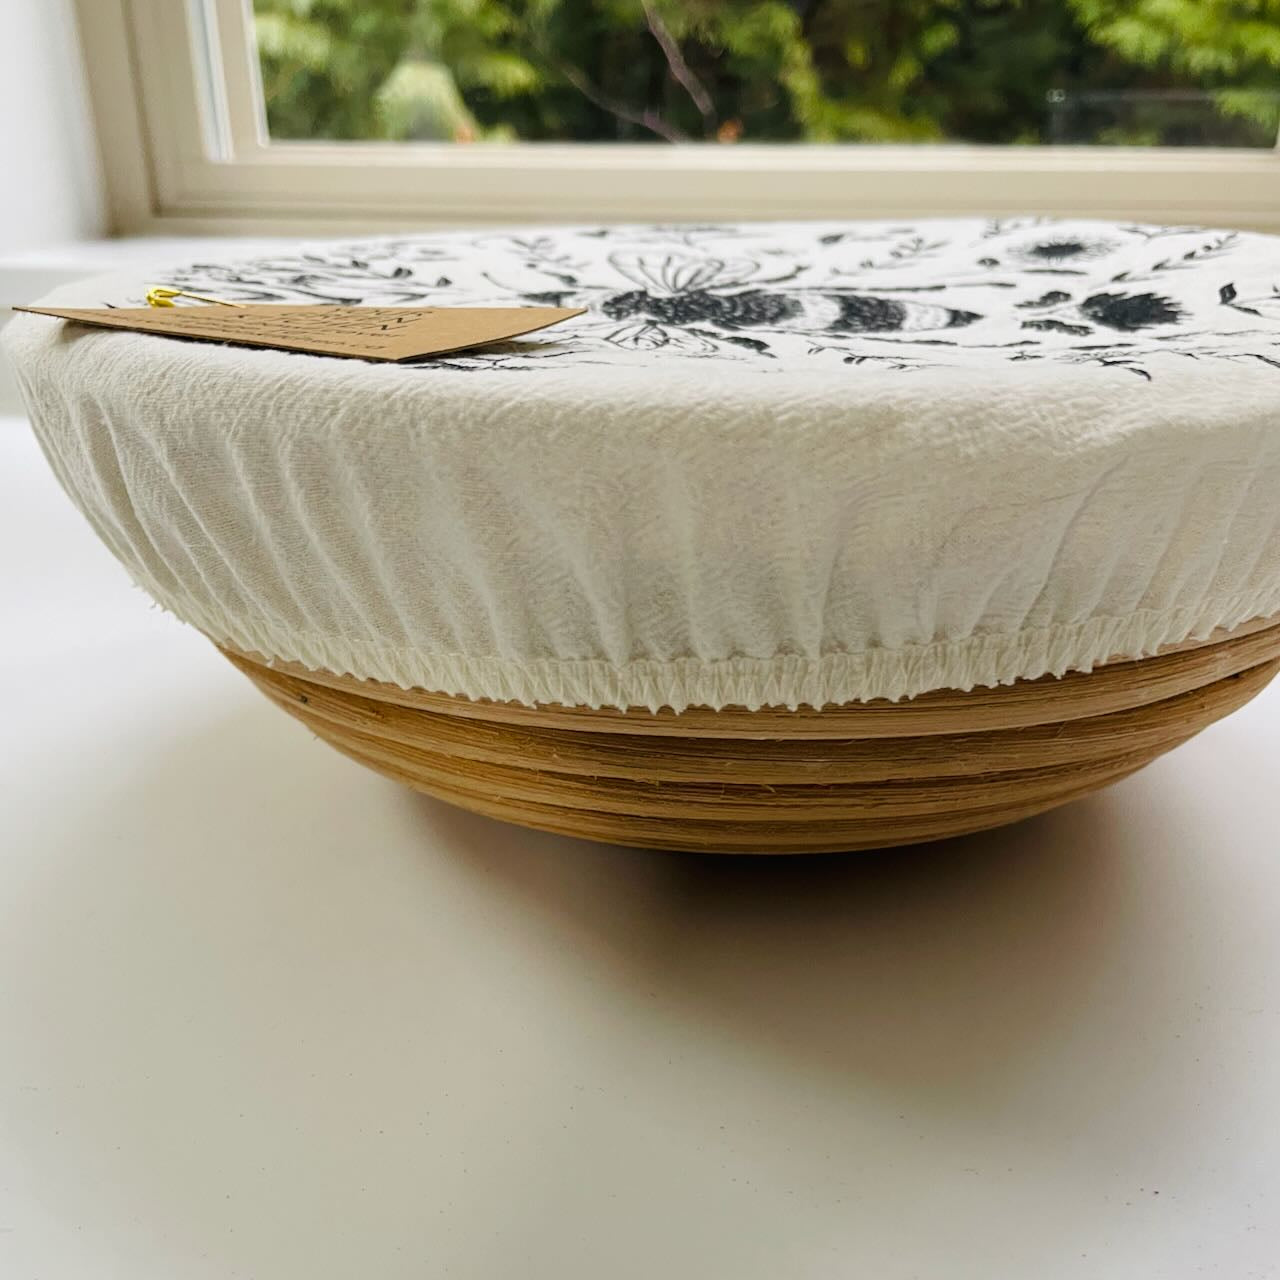 Reusable Fabric Bowl Covers: Large 10"